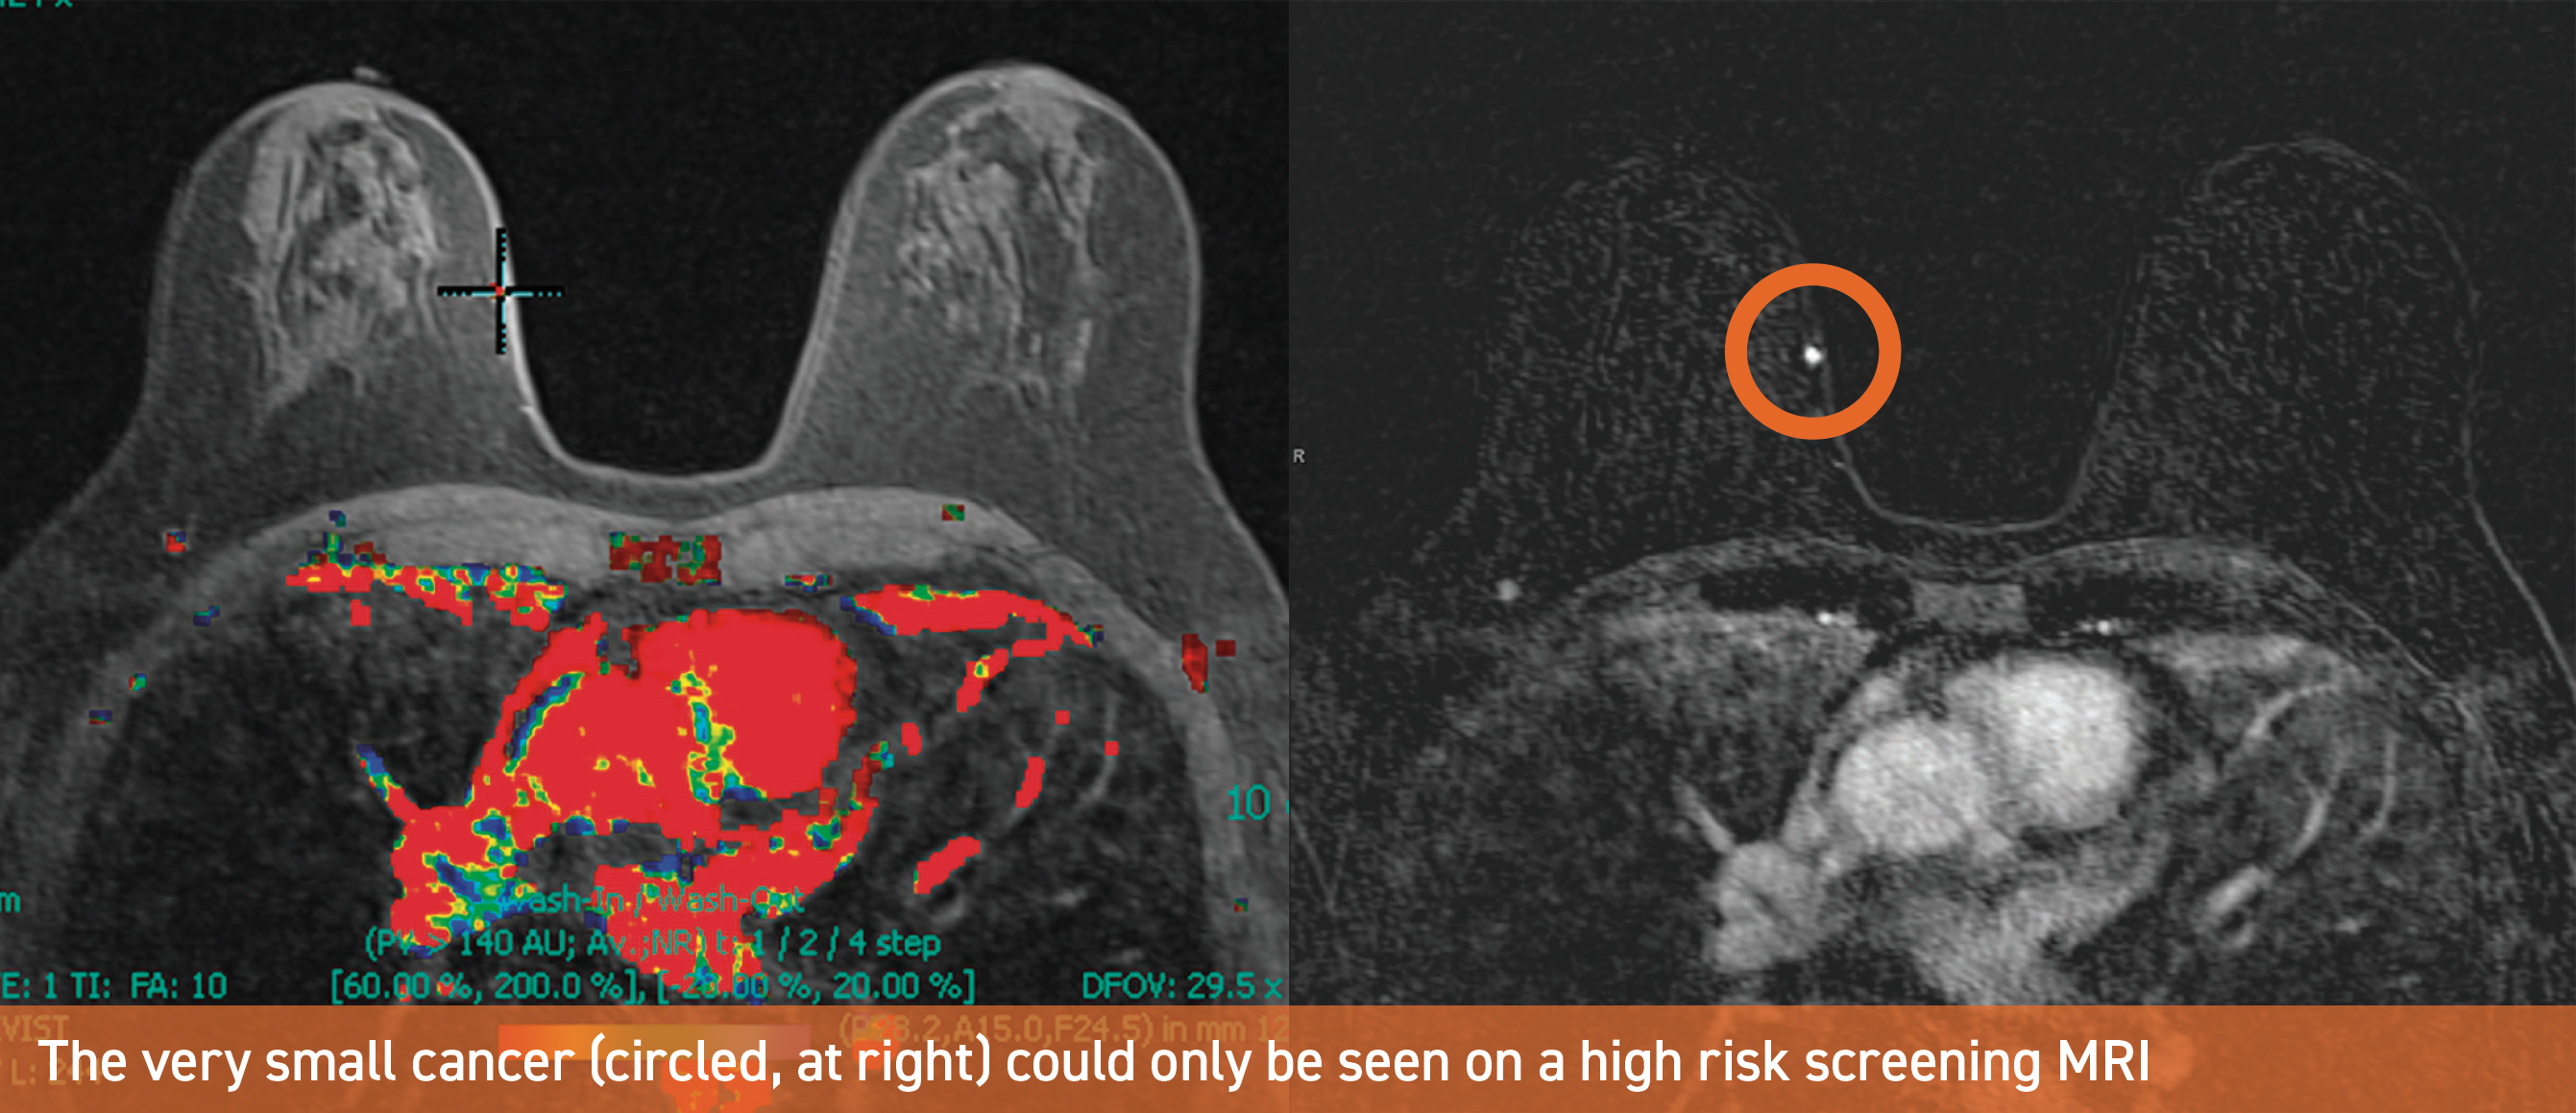 The very small cancer (circled, at right) could only be seen on a high risk screening MRI